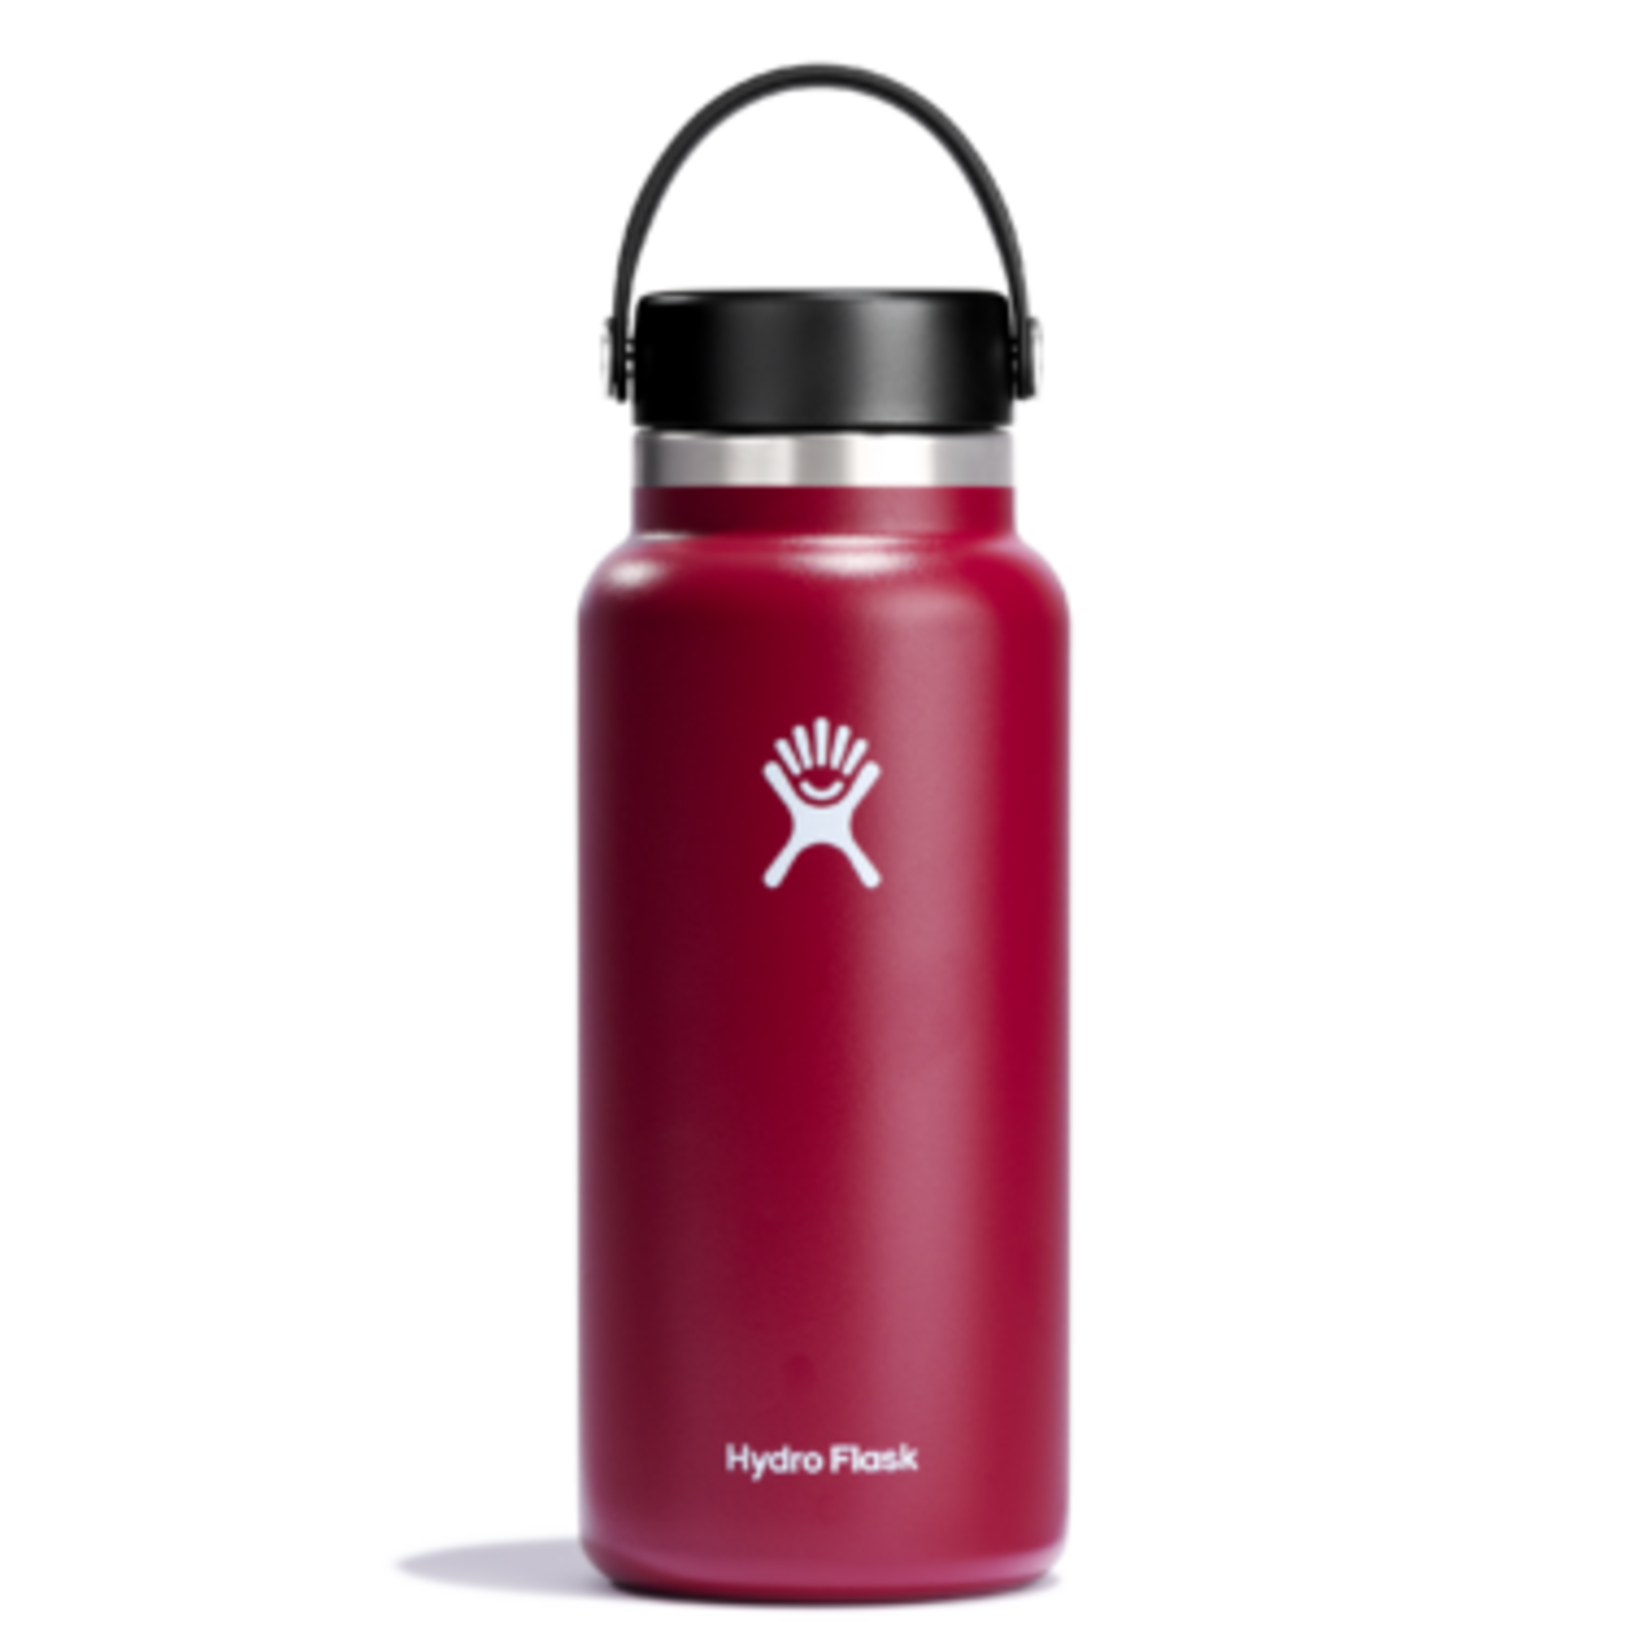 Hydro Flask 32oz wide mouth with flex cap